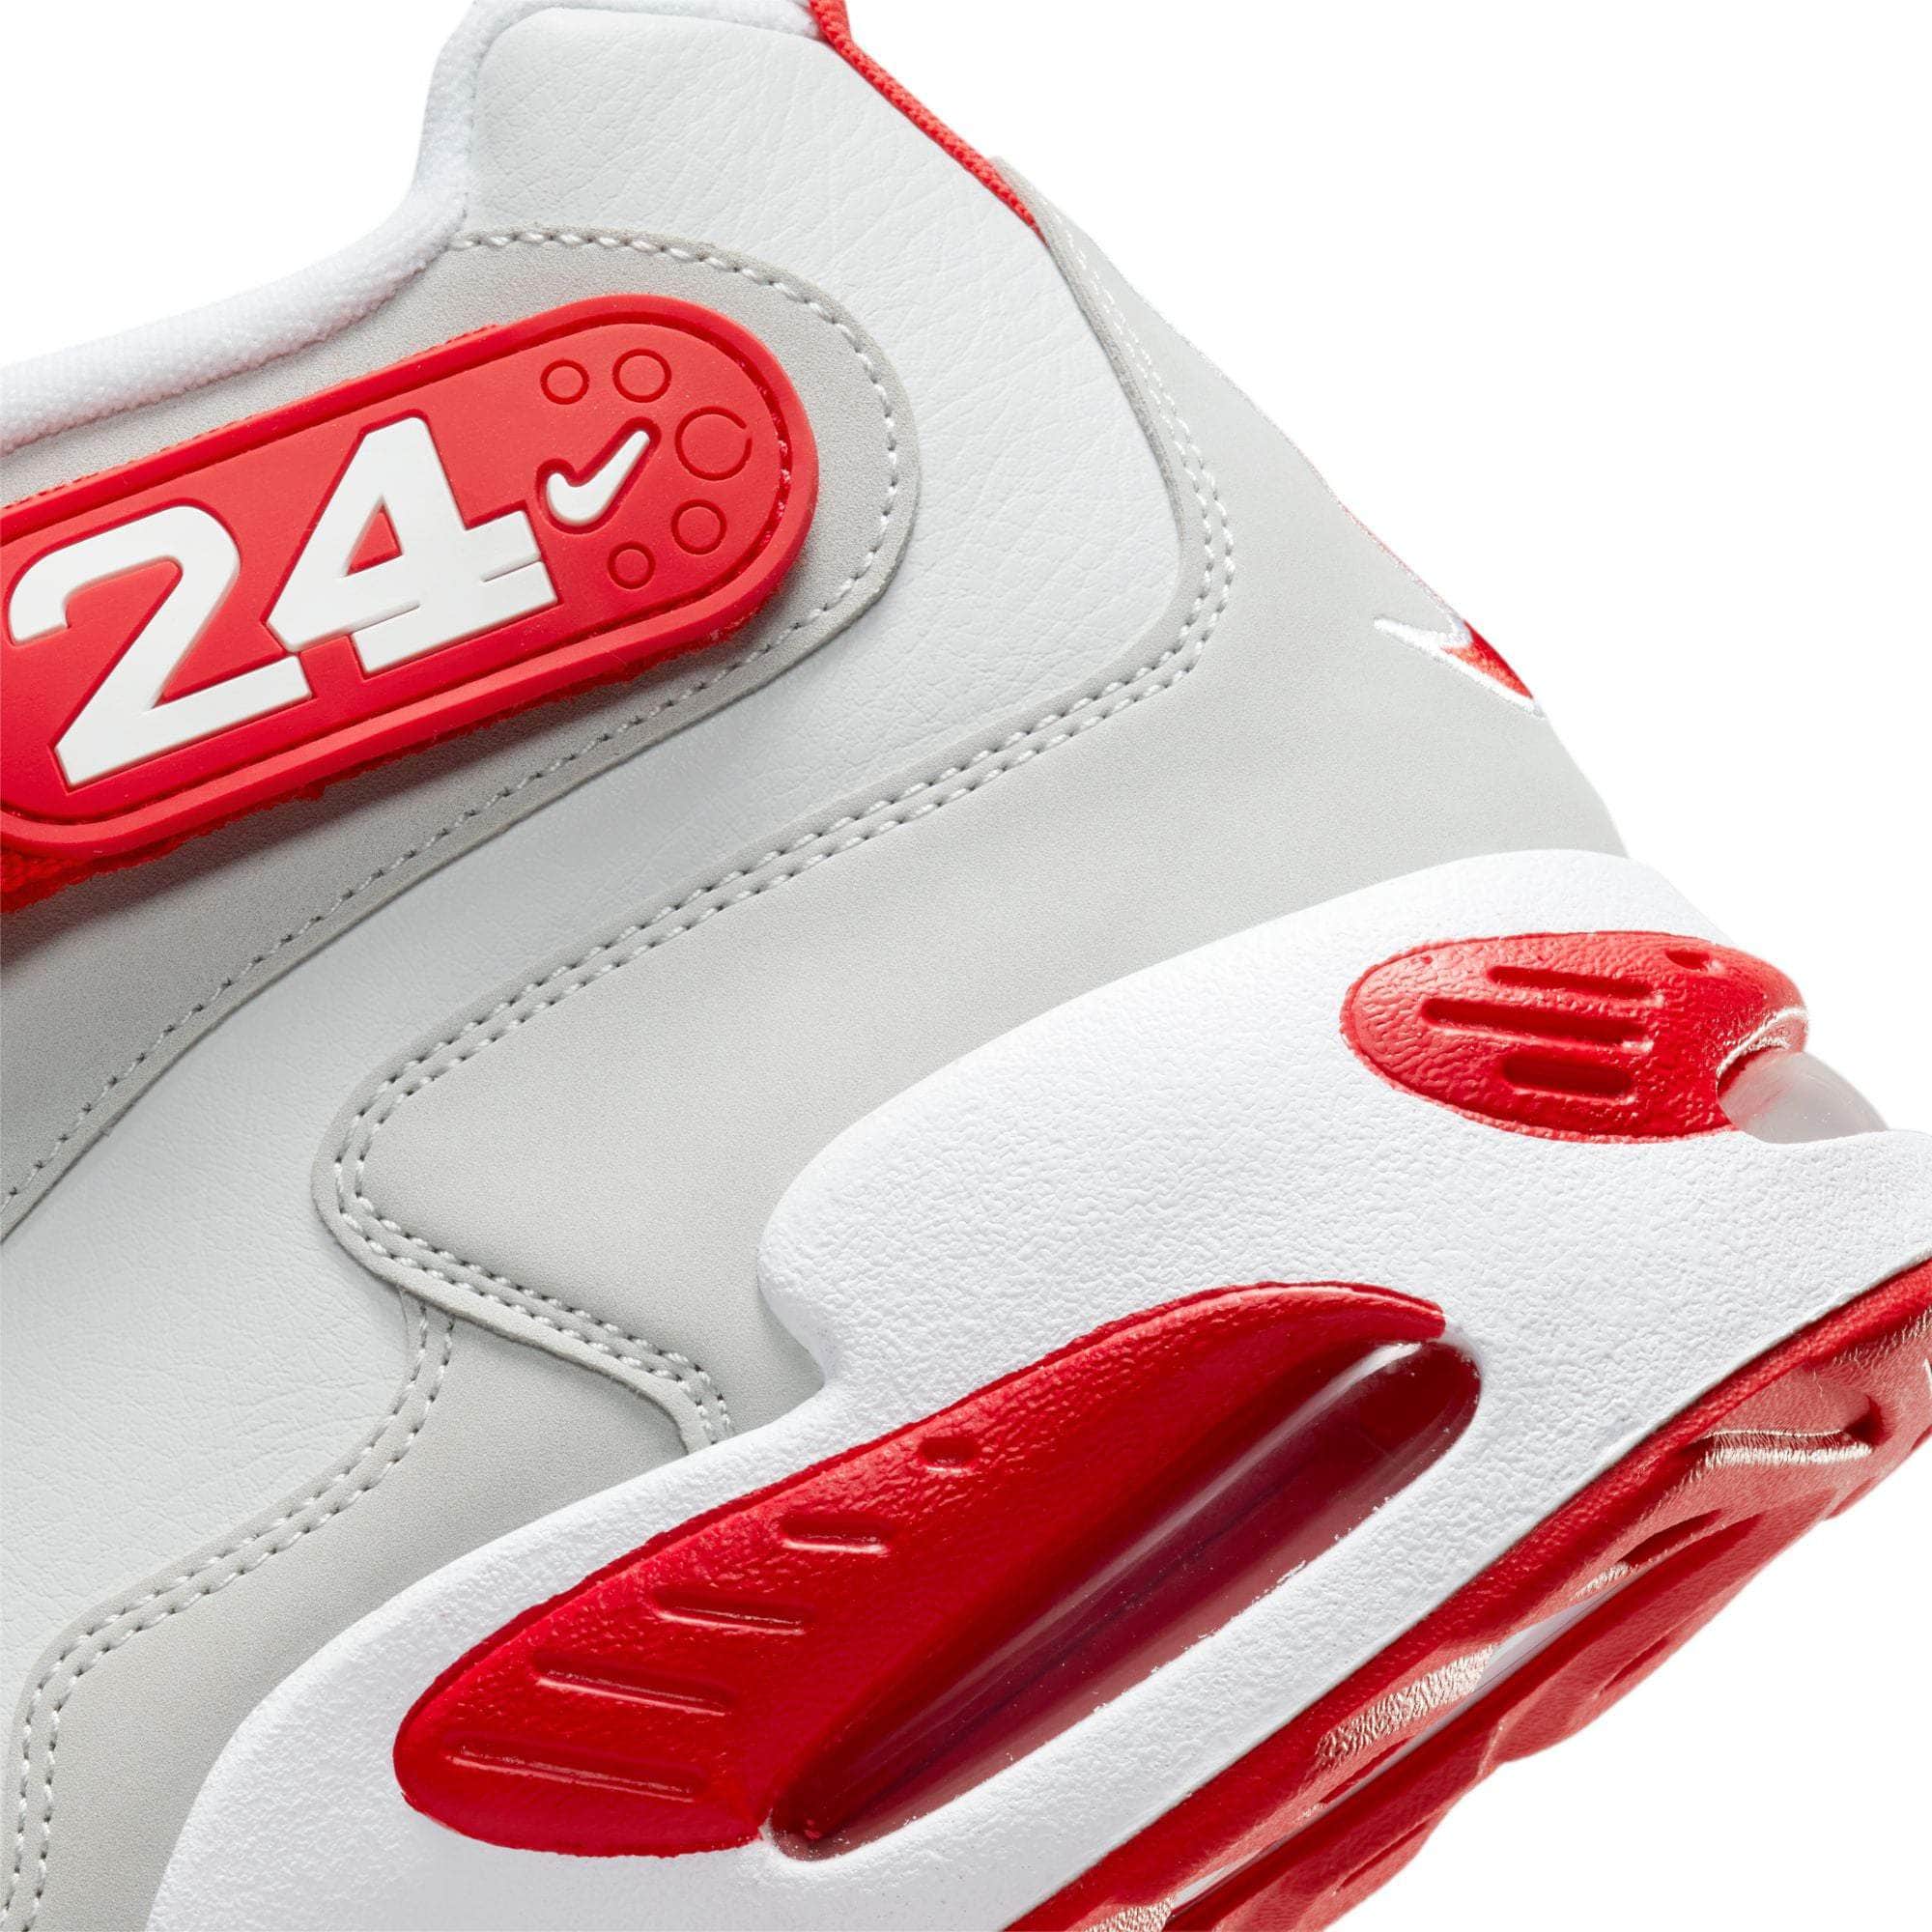 Nike Air Griffey Max 1 Cincinnati Reds for Sale, Authenticity Guaranteed